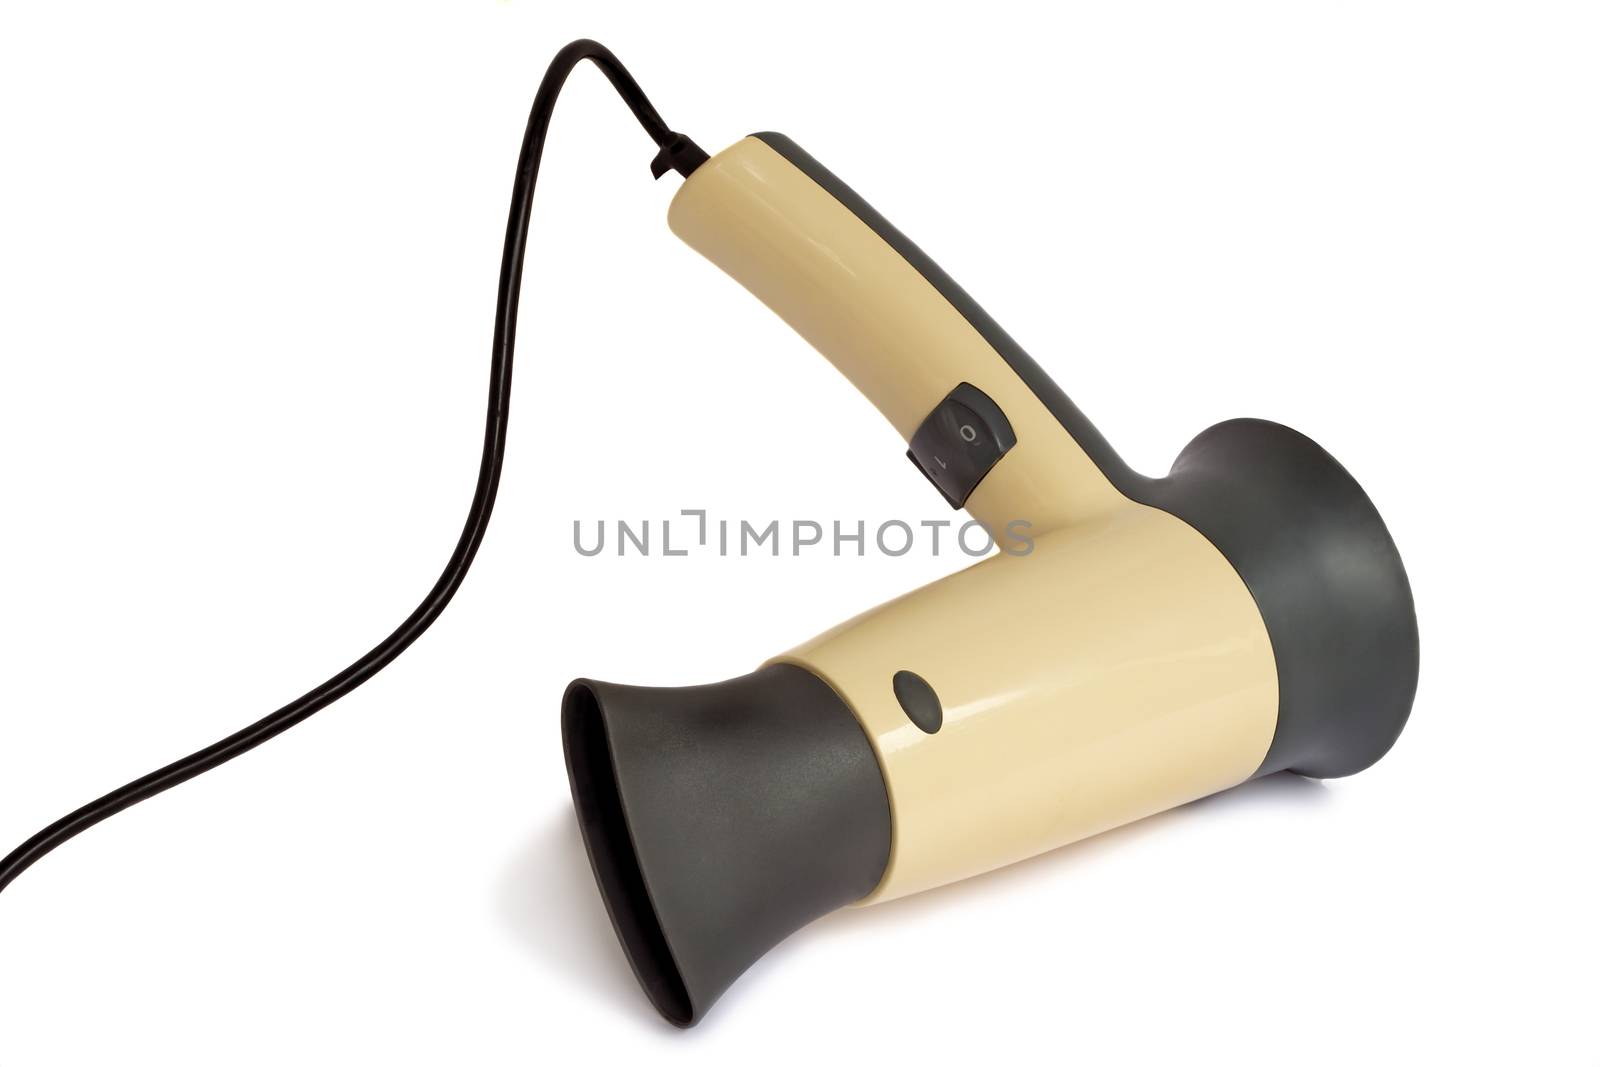 The convenient electric hair dryer for drying of hair. It is presented on a white background.